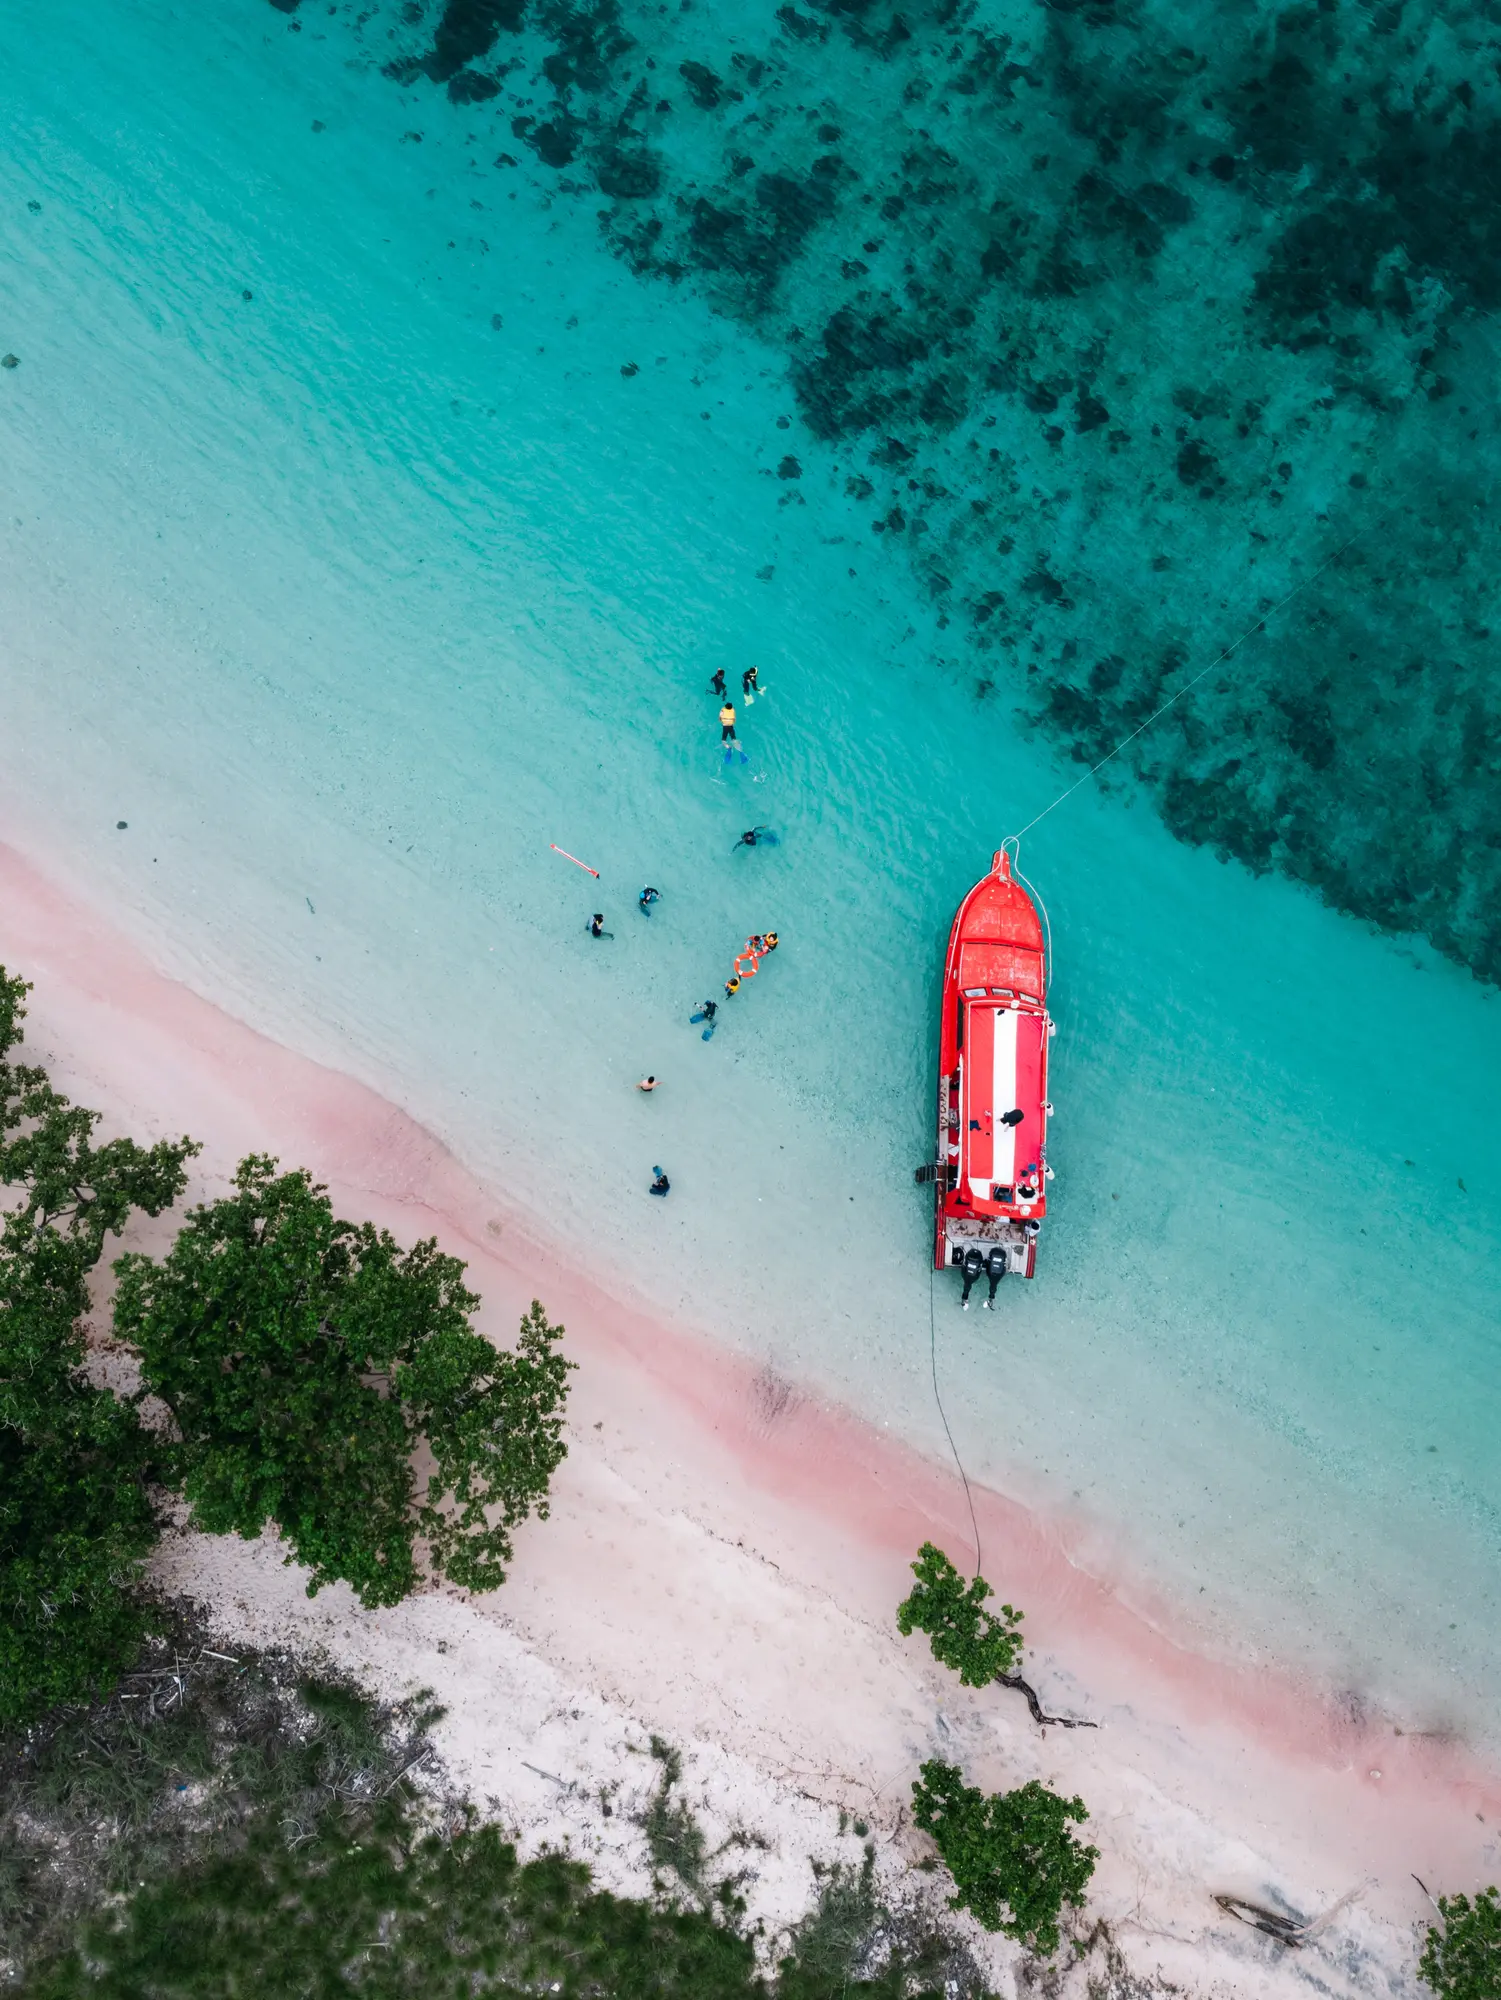 Aerial shot of a red boat and people in the turquoise water at Pink Beach in Komodo Island - Indonesia vs. Thailand